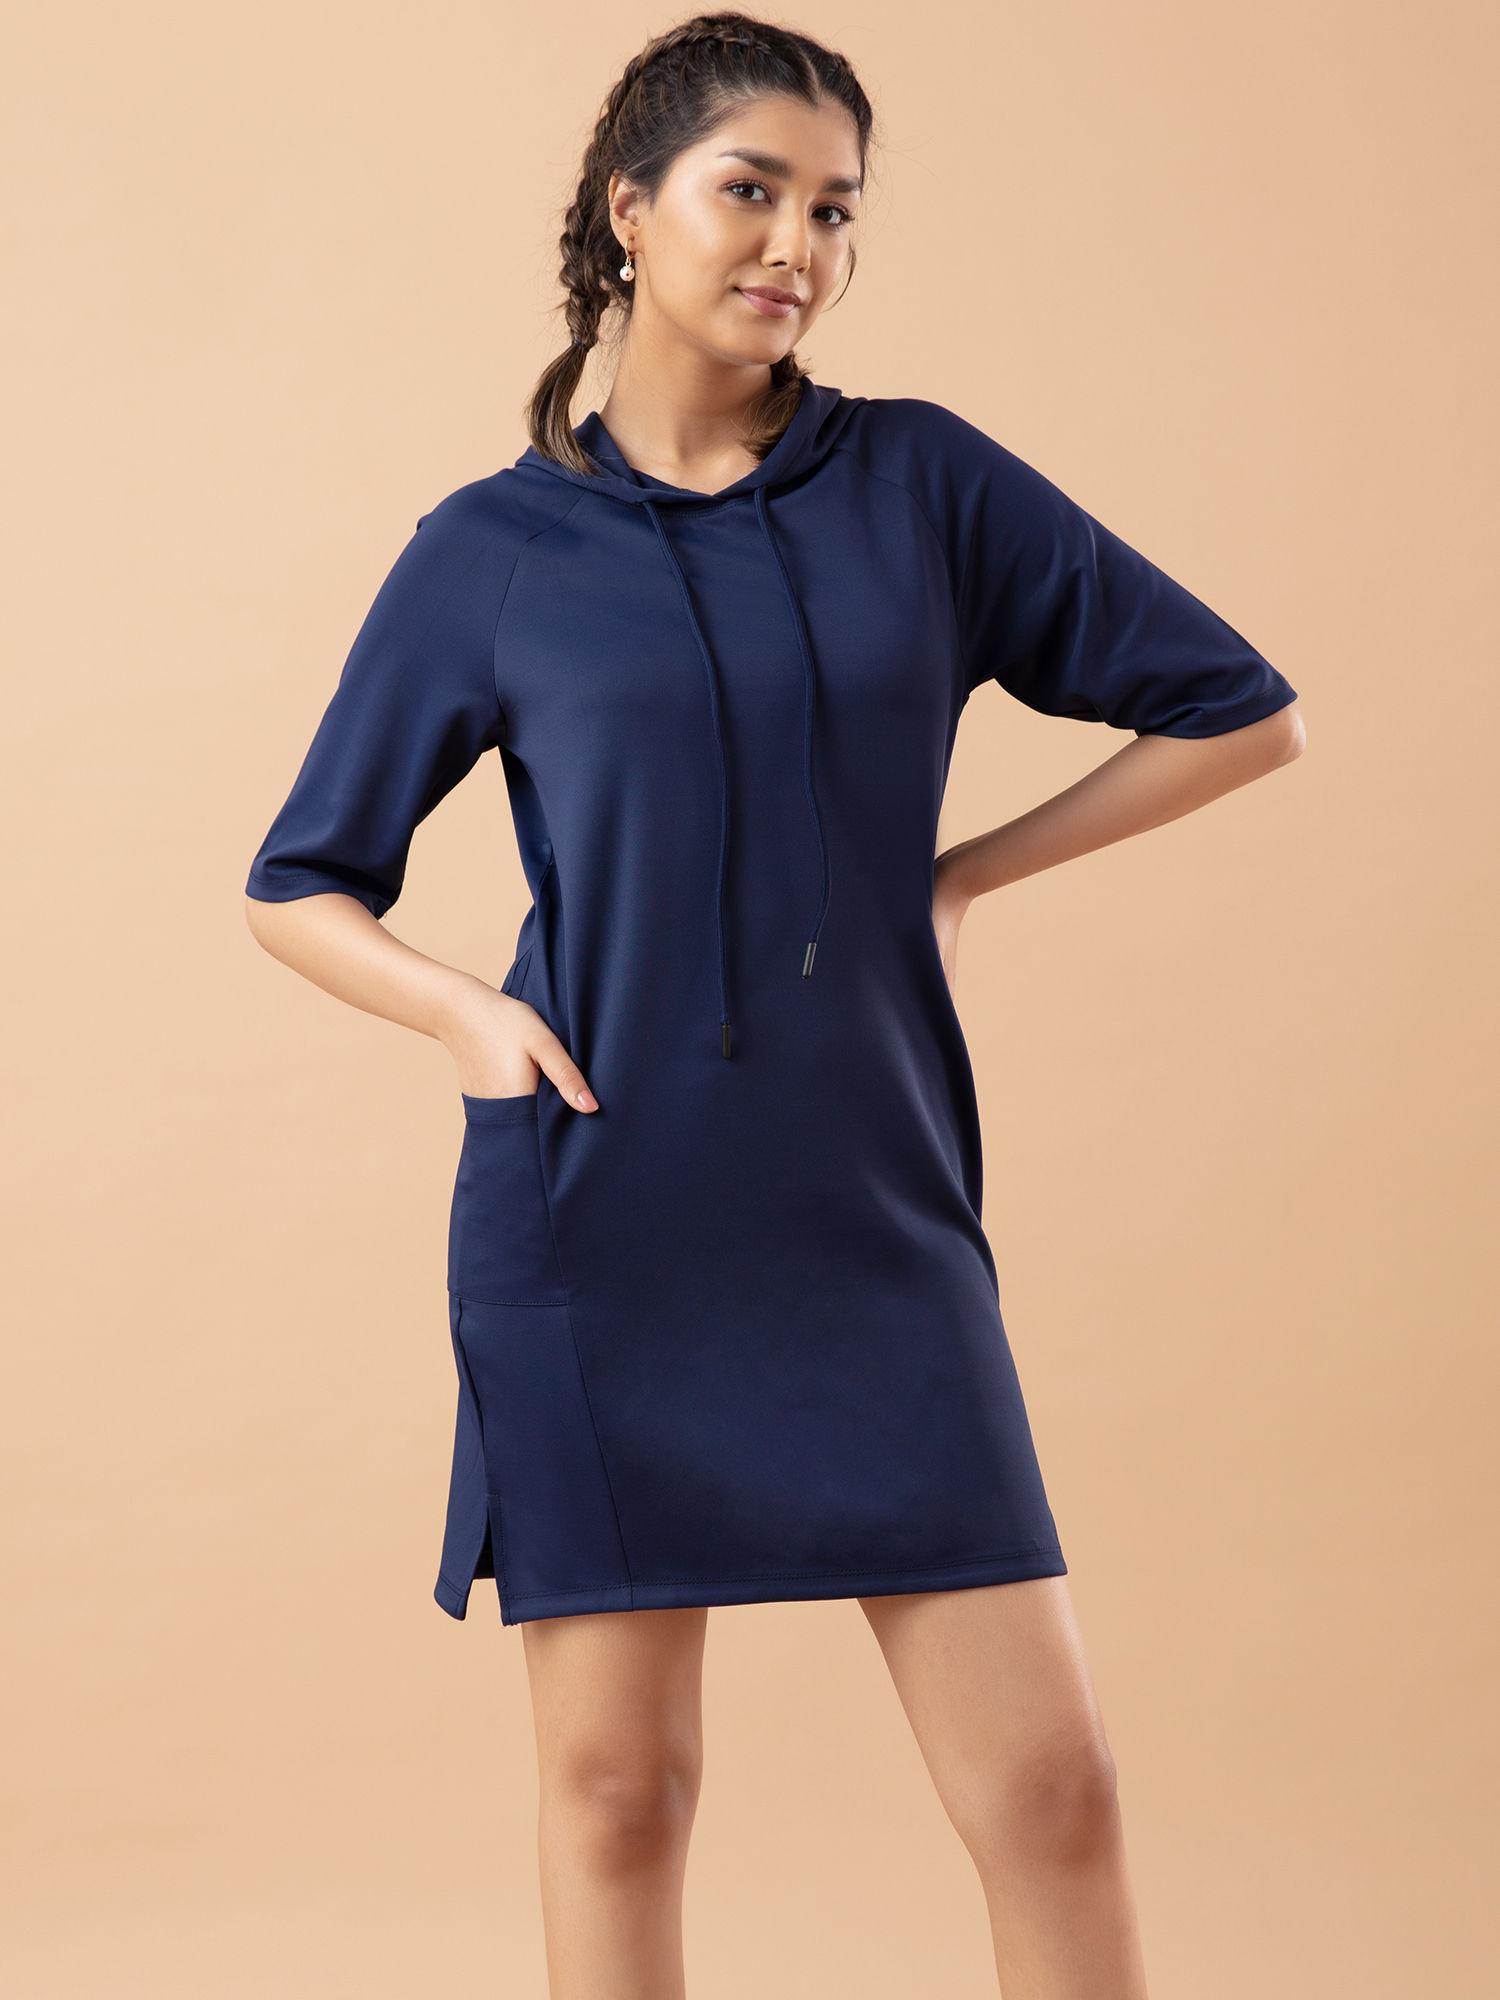 nykd all day casual chic hoodie dress - nyat143 peacoat